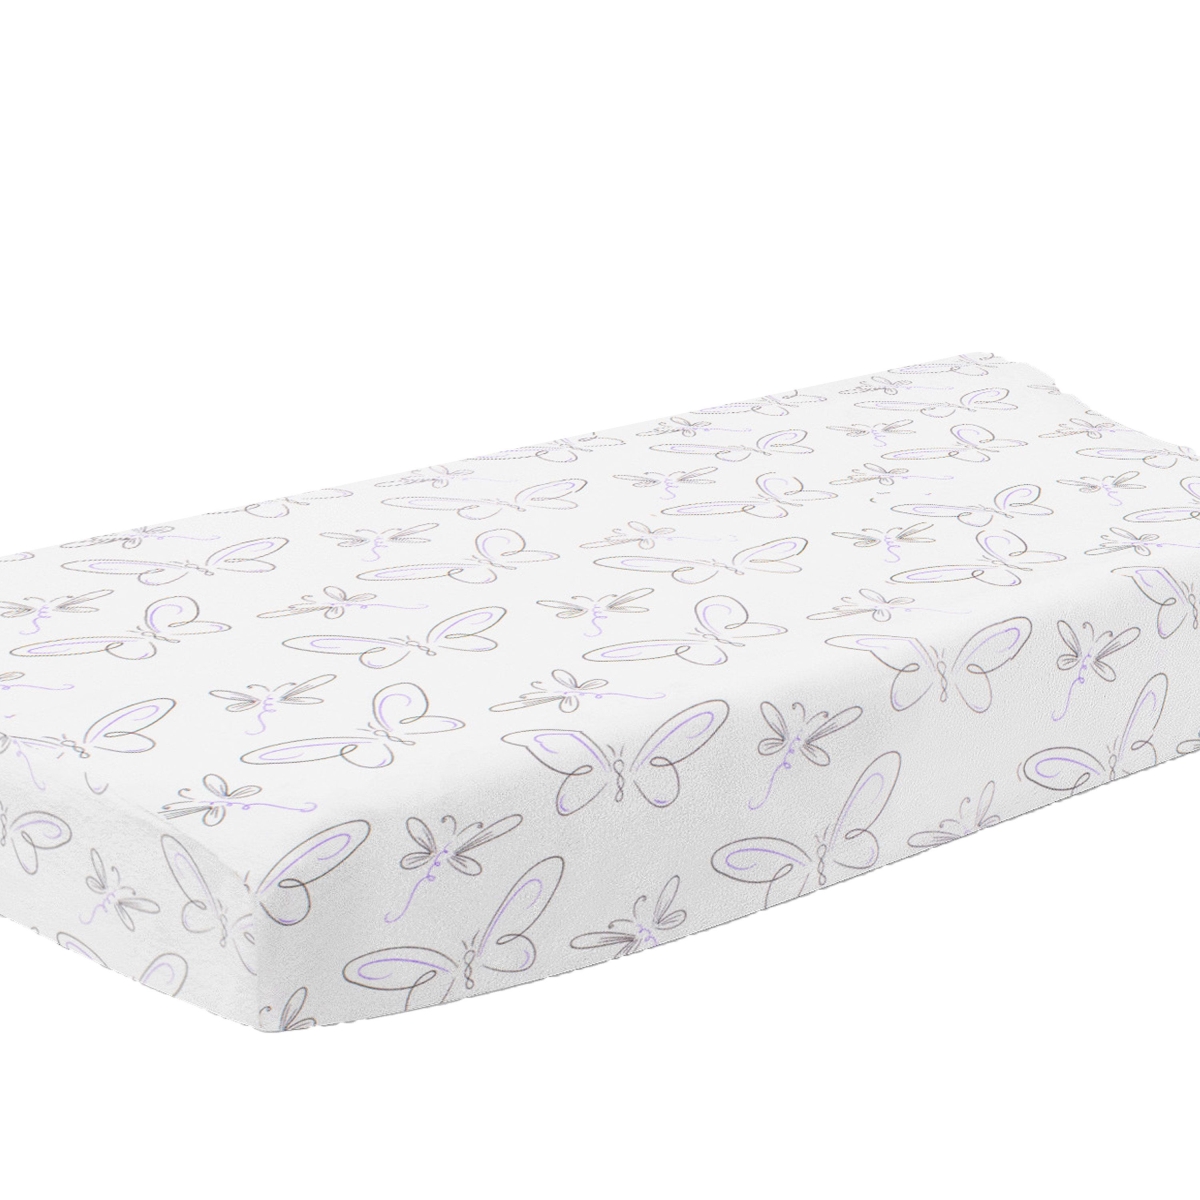 Picture of Pam Grace Creations CPC-Butterflies 32 x 16 x 5 in. Butterflies &amp; Dragonflies Changing Pad Cover  Lavender  Black &amp; White